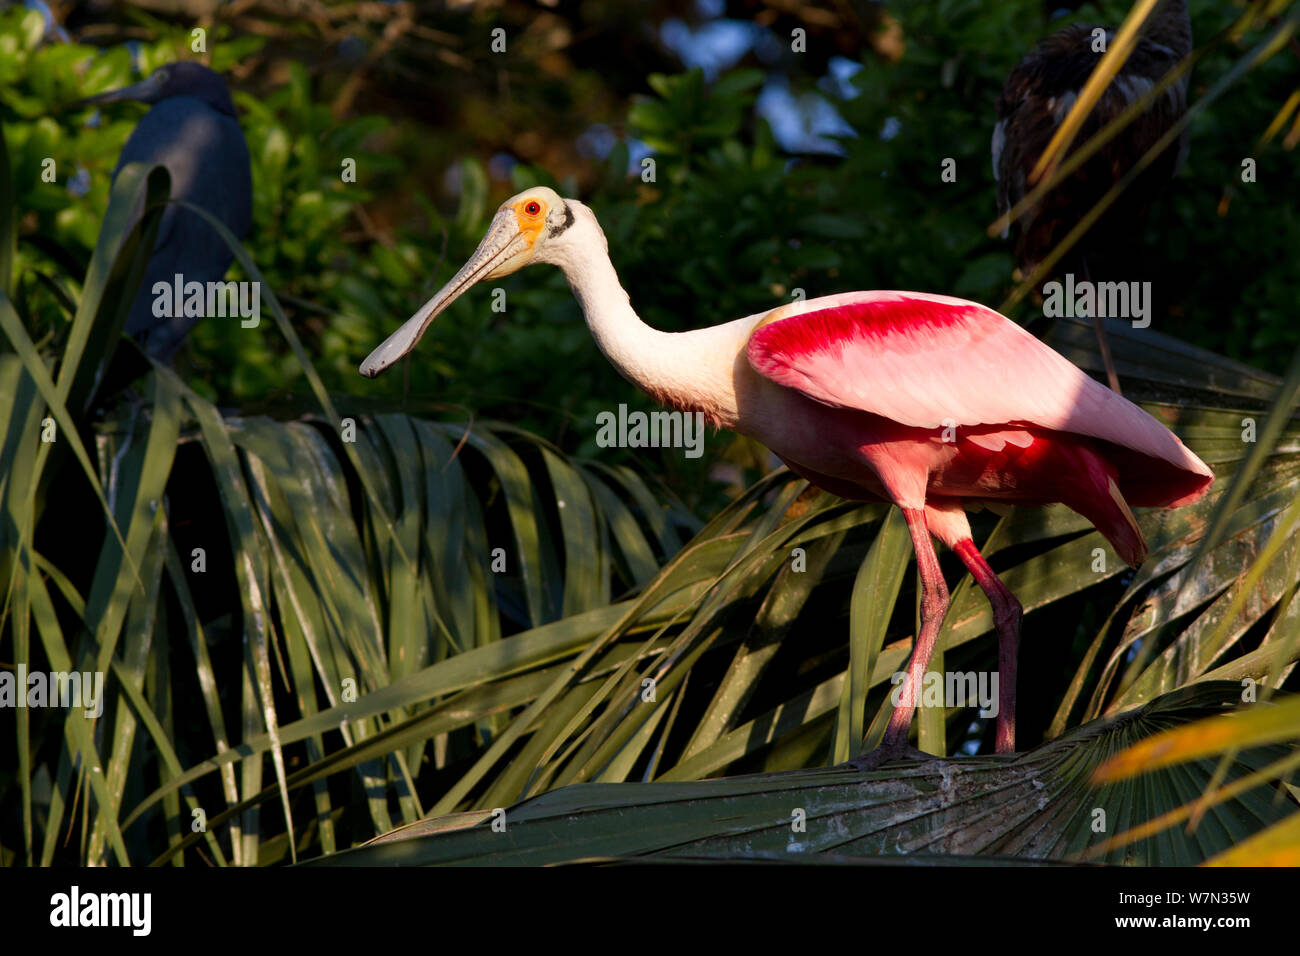 Roseate Spoonbill (Platalea ajaja) adult in breeding plumage, standing in palm fronds. St. Johns County, Florida, USA, March. Stock Photo